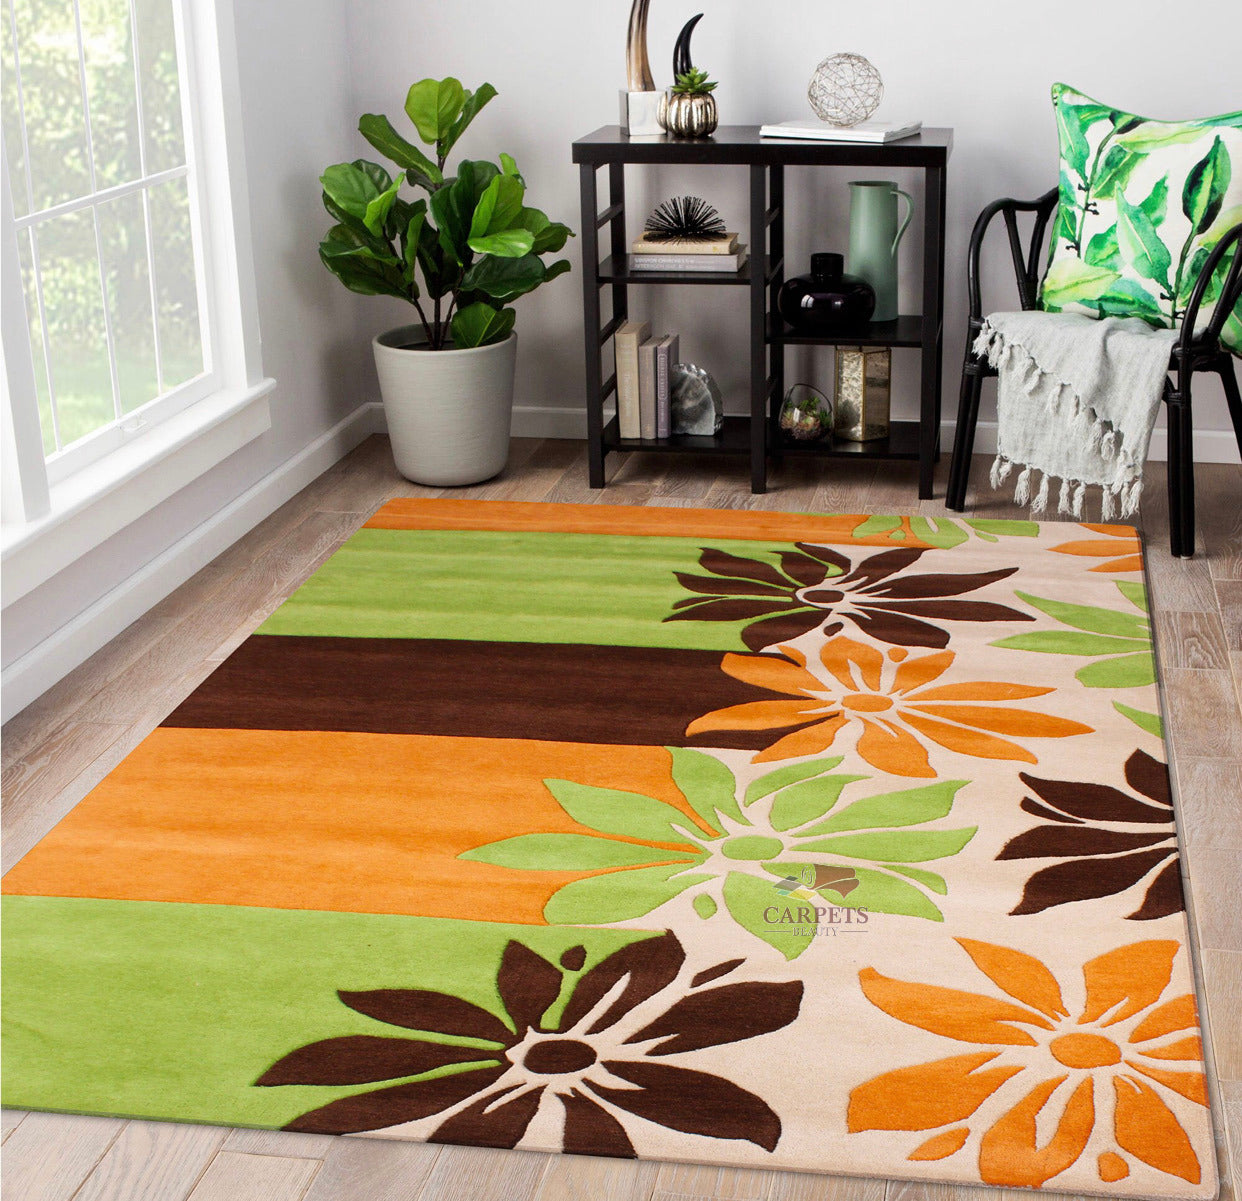 Multi color Floral Woolen Carpets for bedrooms and living rooms